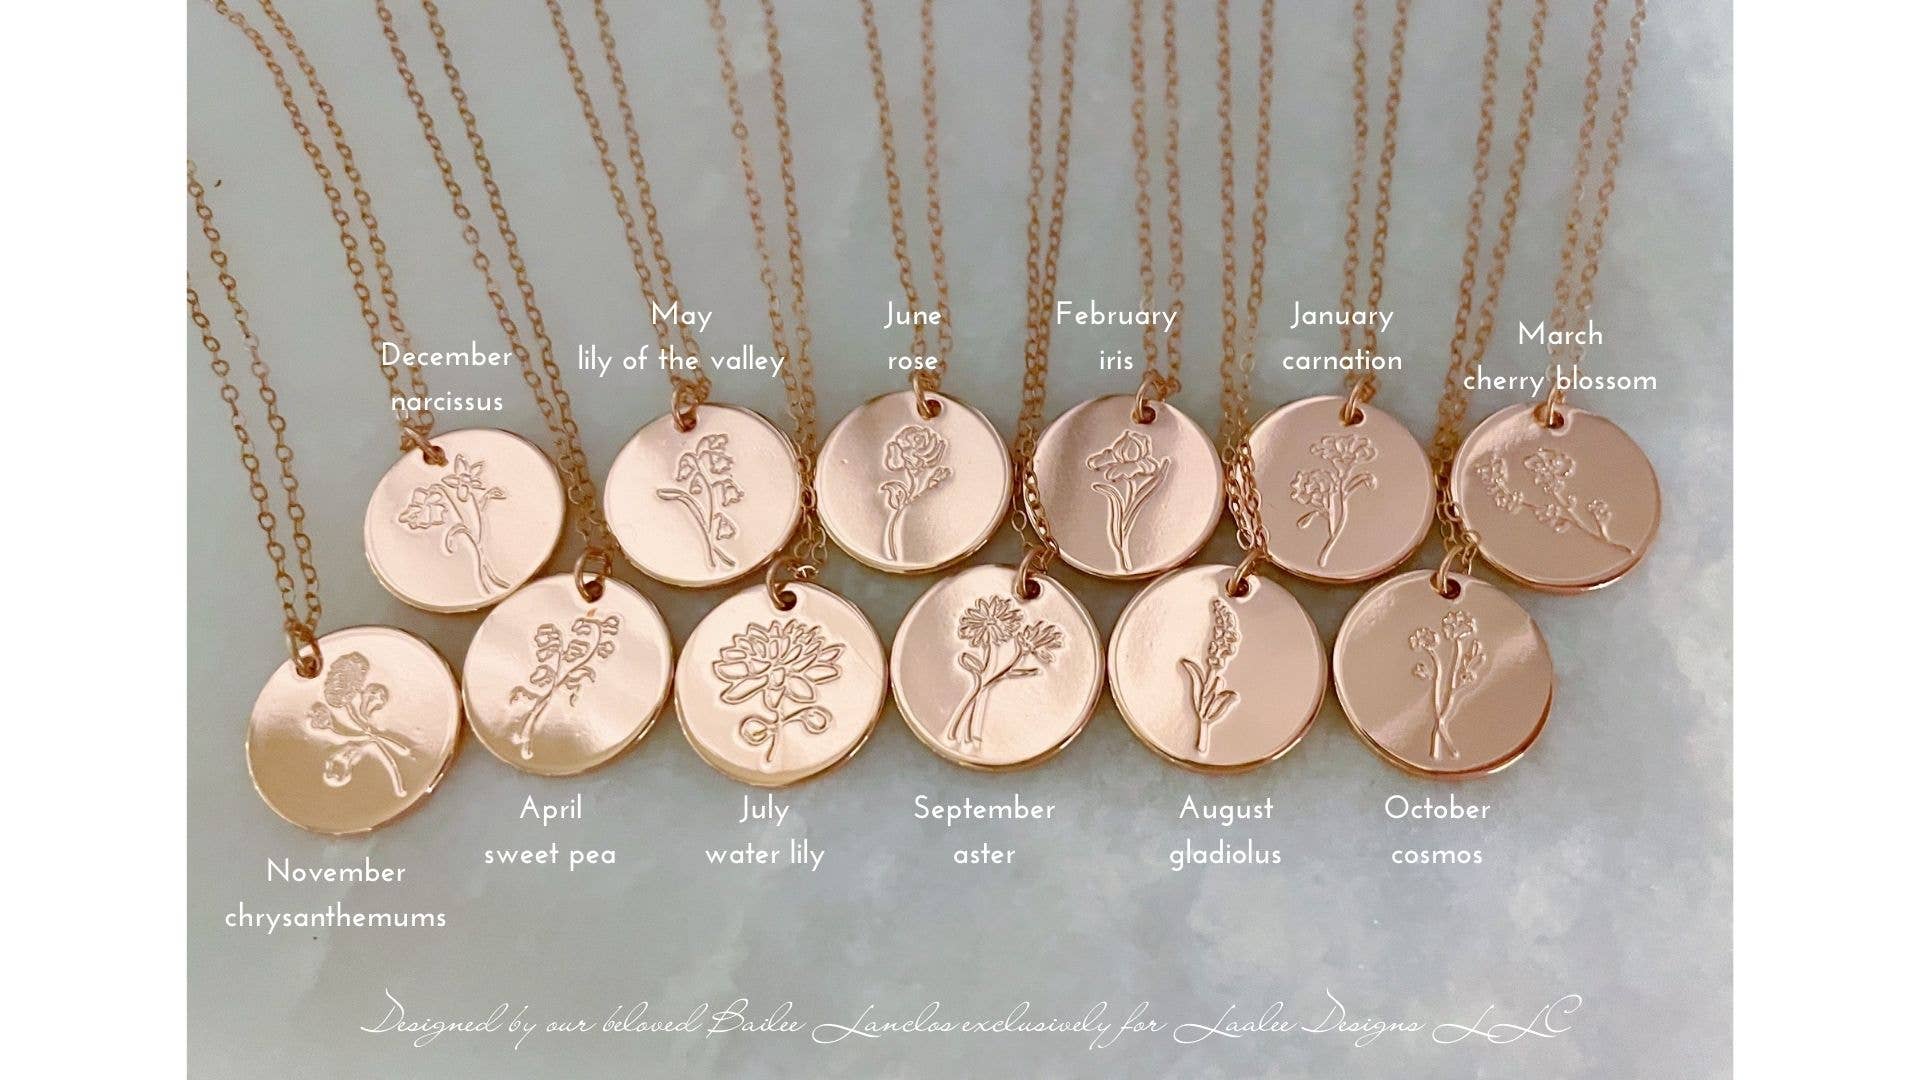 Rose Gold Birth Flower Necklace, Mothers Day Jewelry Gift: January-carnation Spring-Summer Laalee Jewelry